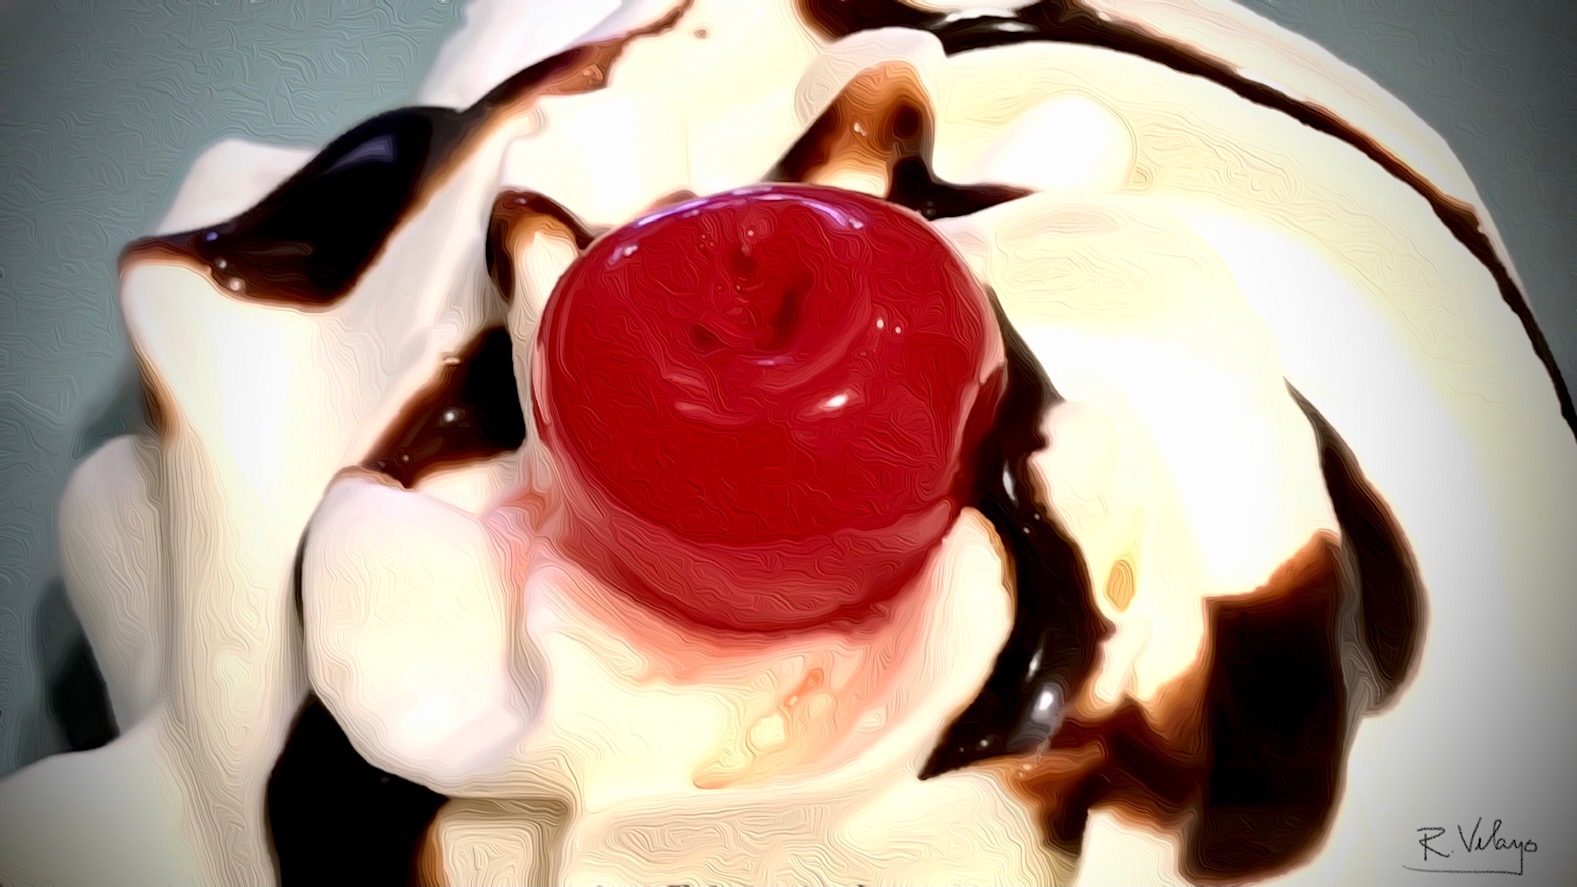 "WHIP CREAM, CHOCOLATE SYRUP, AND CHERRY TO TOP" [Created: 9/02/2021]